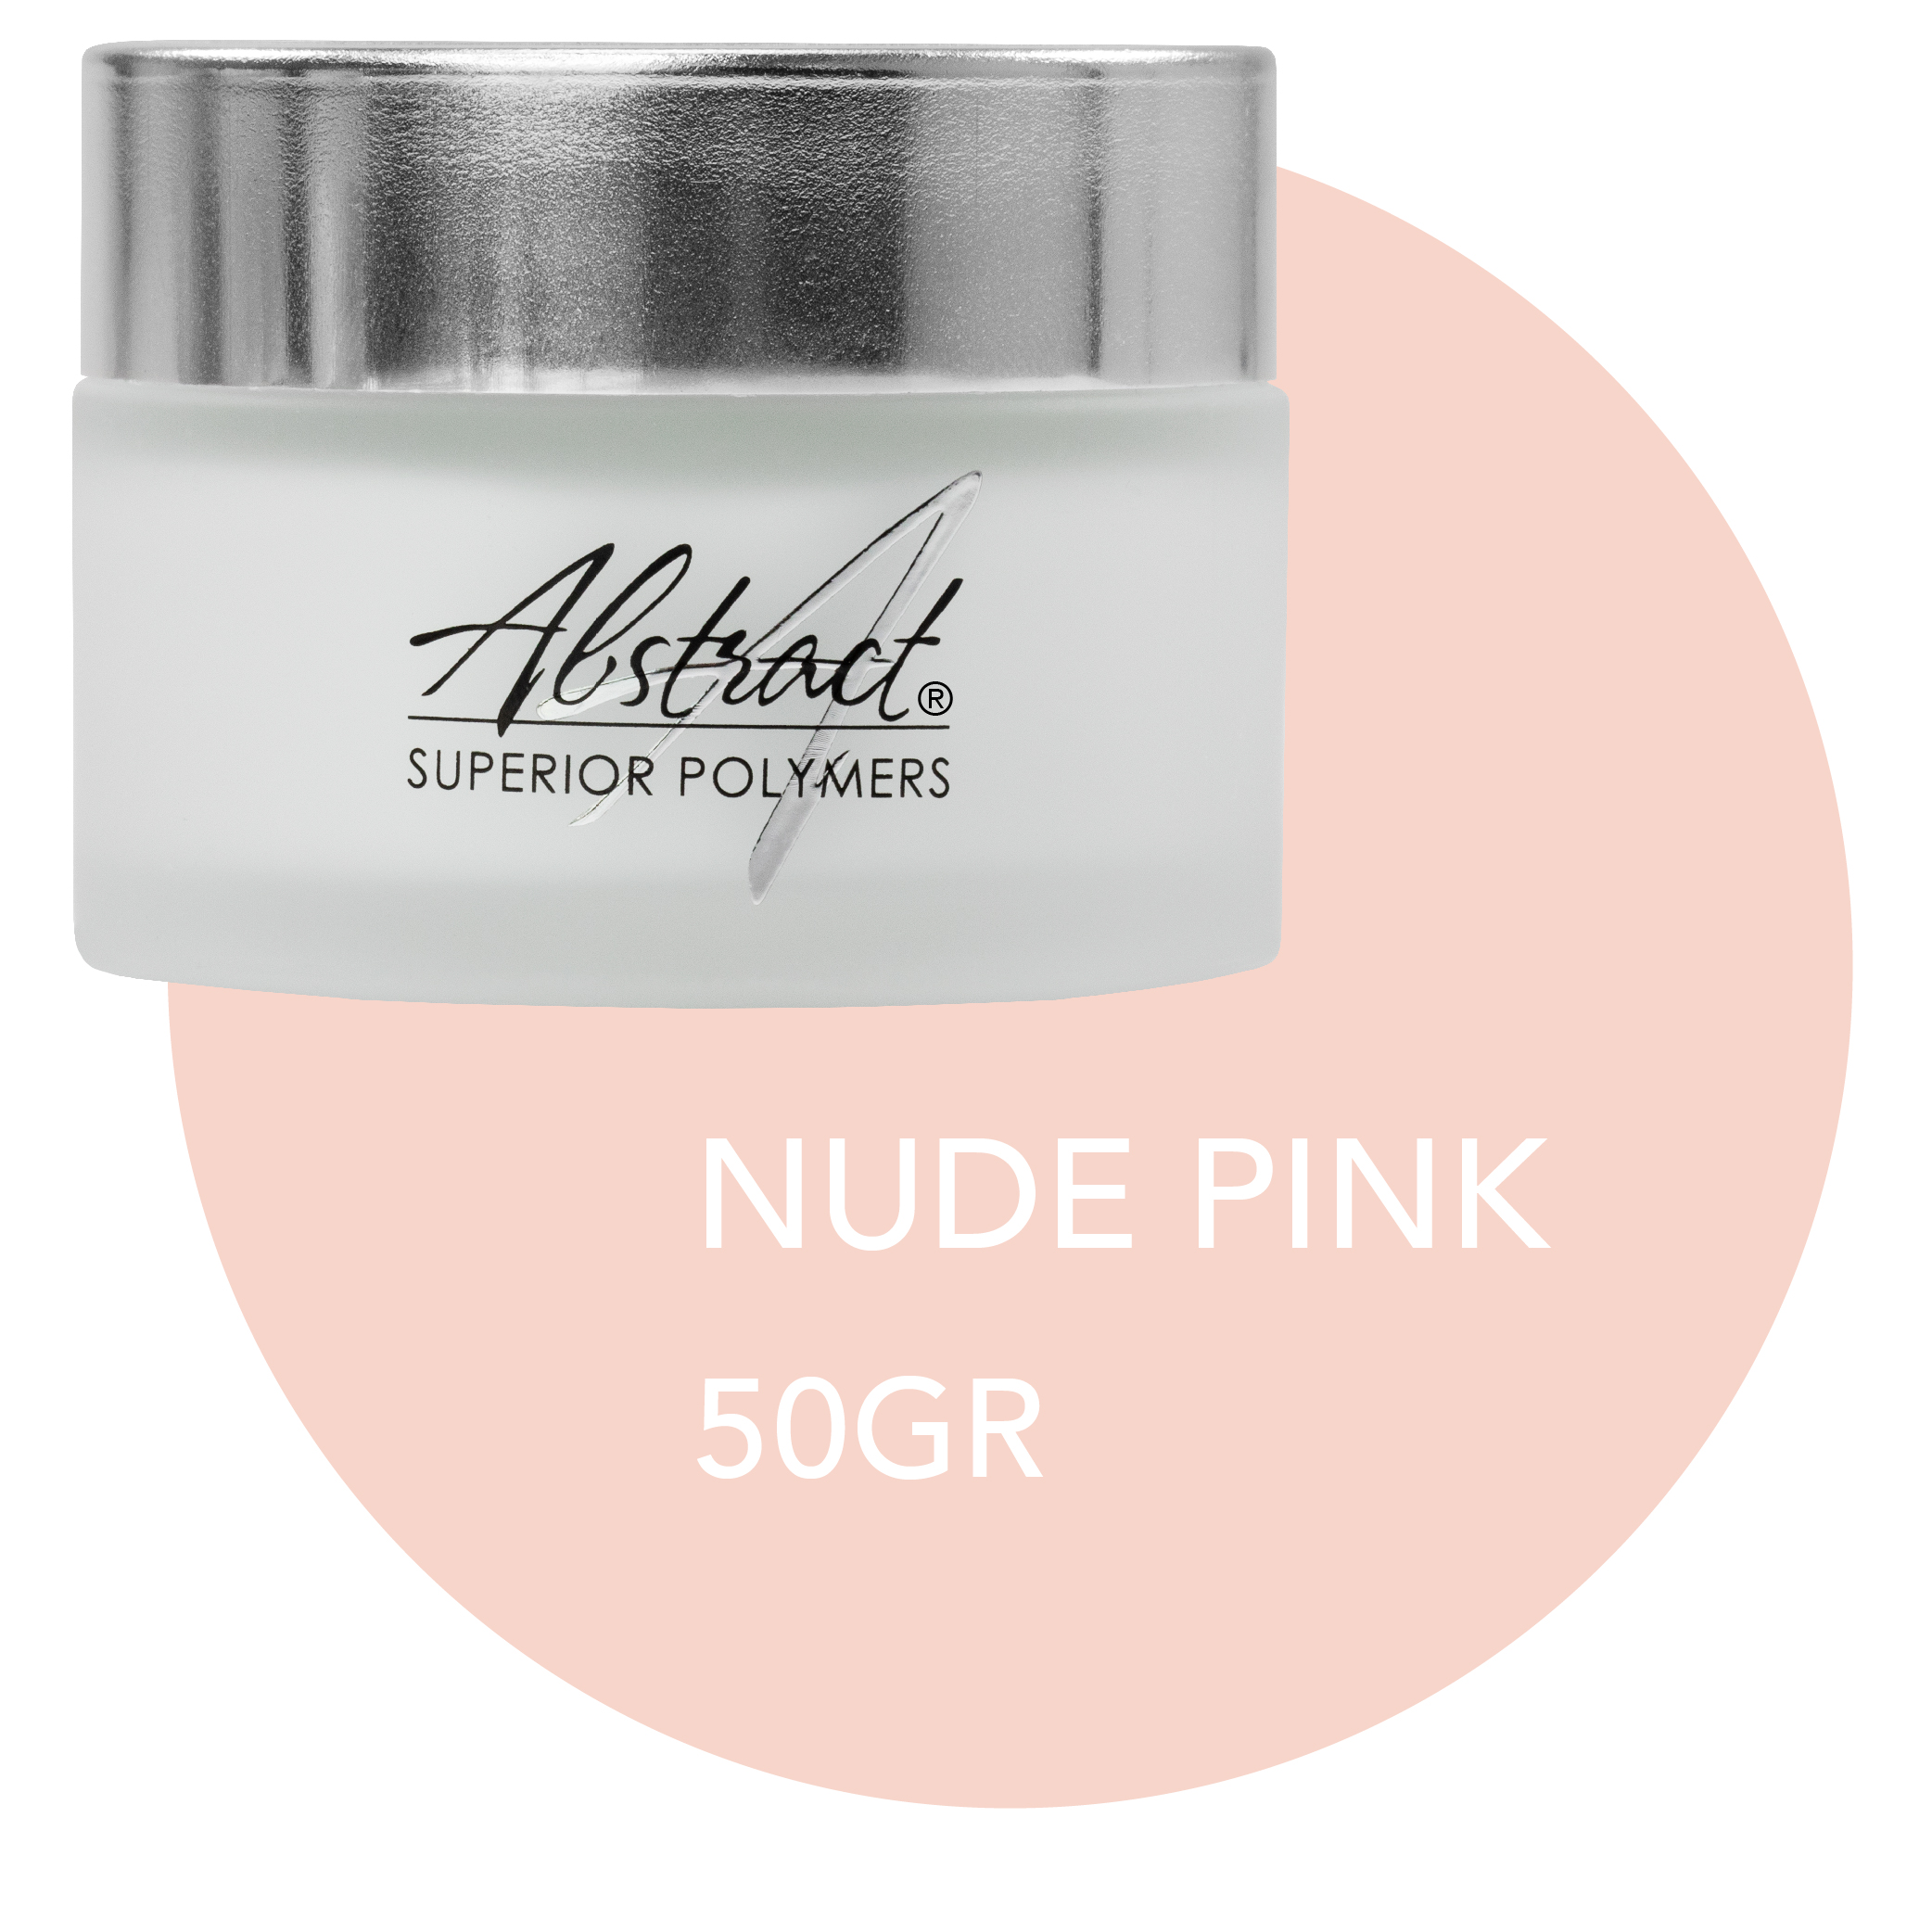 Superior Polymer NUDE PINK 50gr, Abstract | 233514